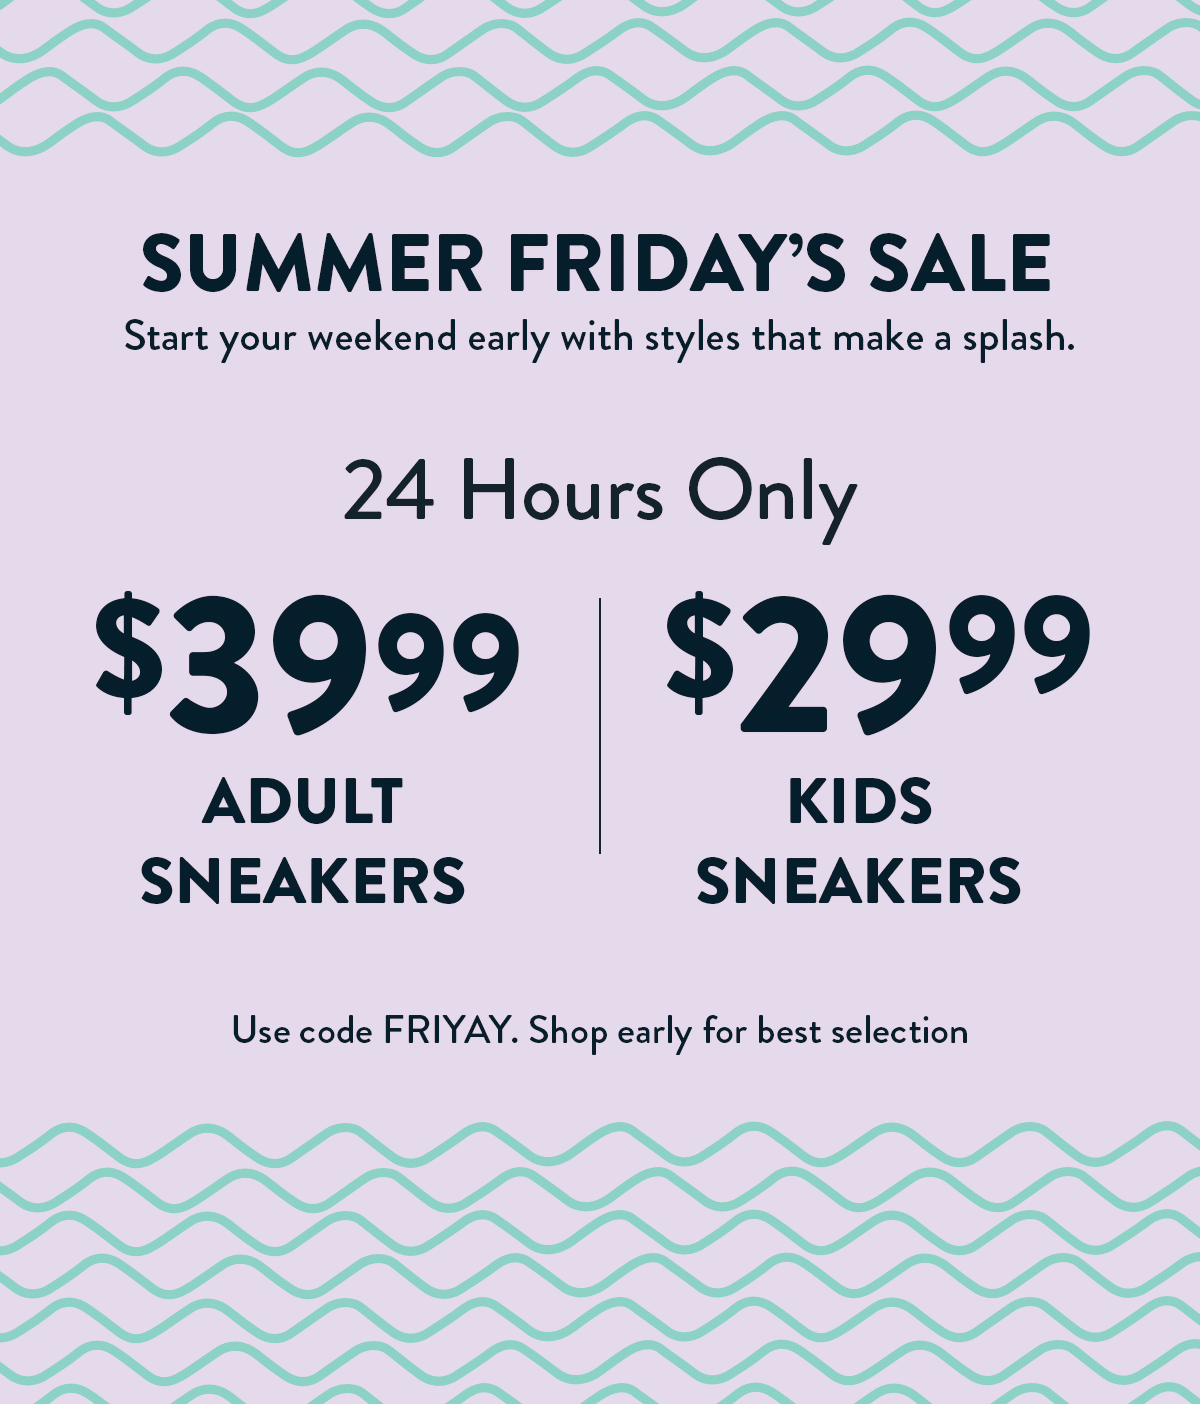 Summer Friday's Sale. 24 Hours Only. Save an extra 30% OFF Sale Items. Use code FRIYAY. Shop early for best selection.